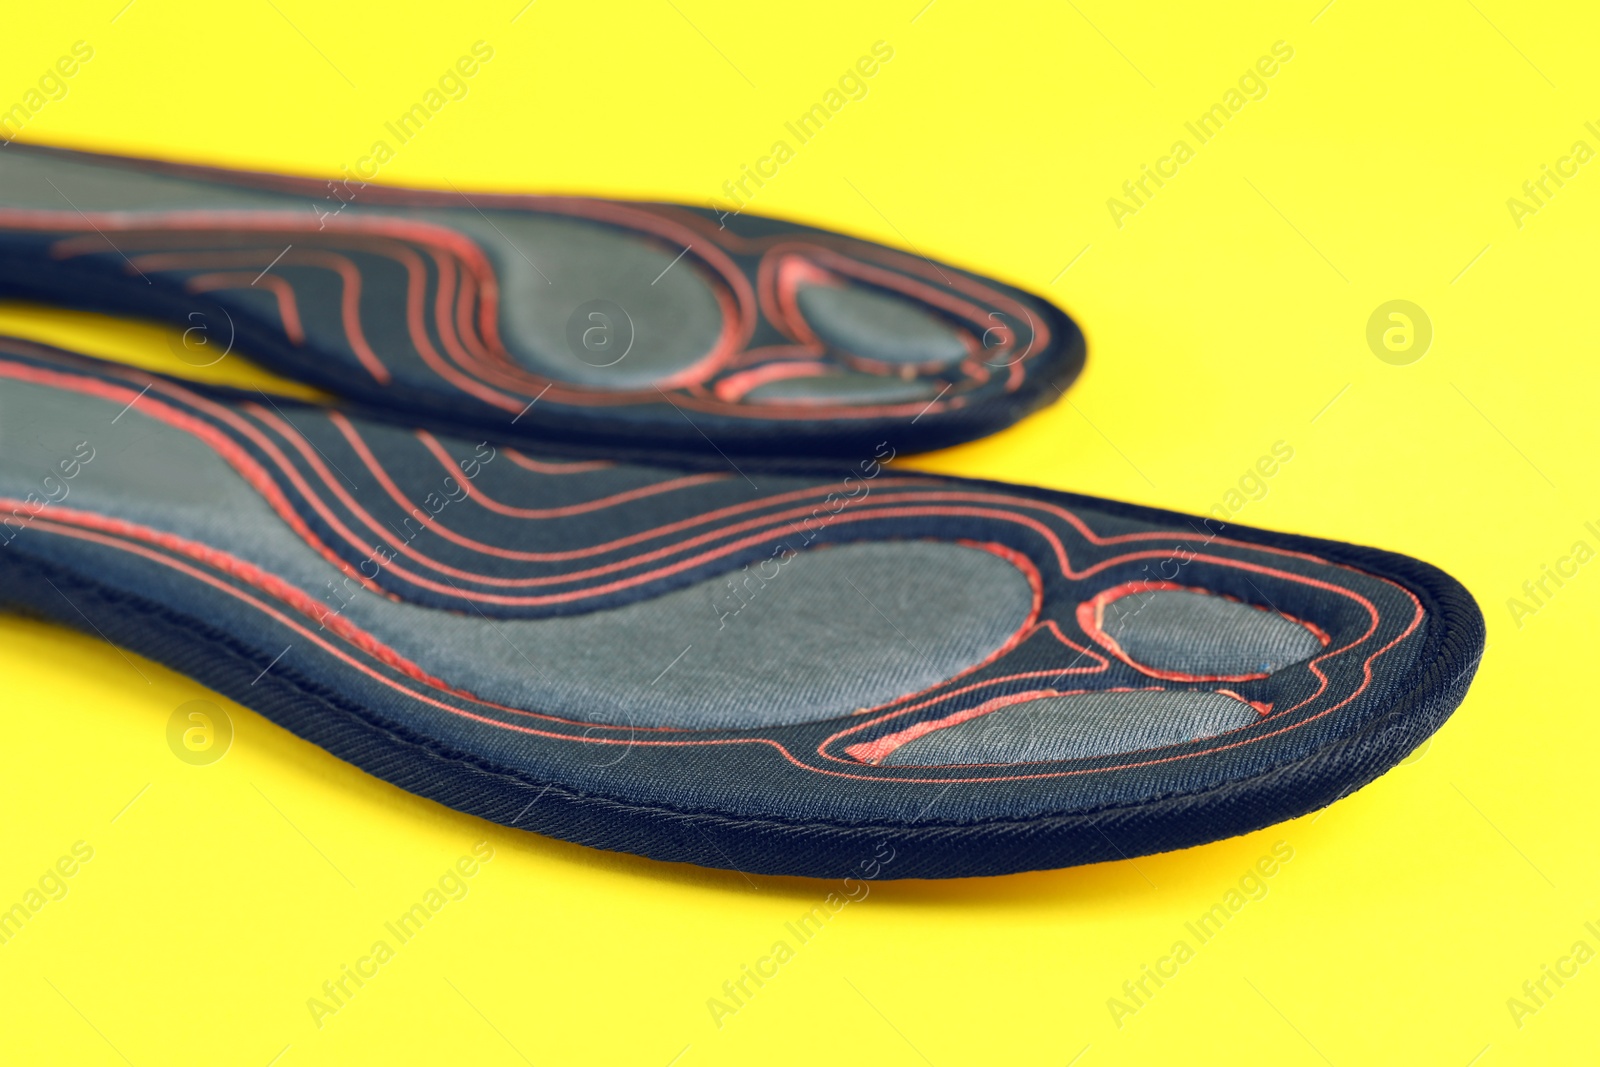 Photo of Pair of orthopedic insoles on yellow background, closeup